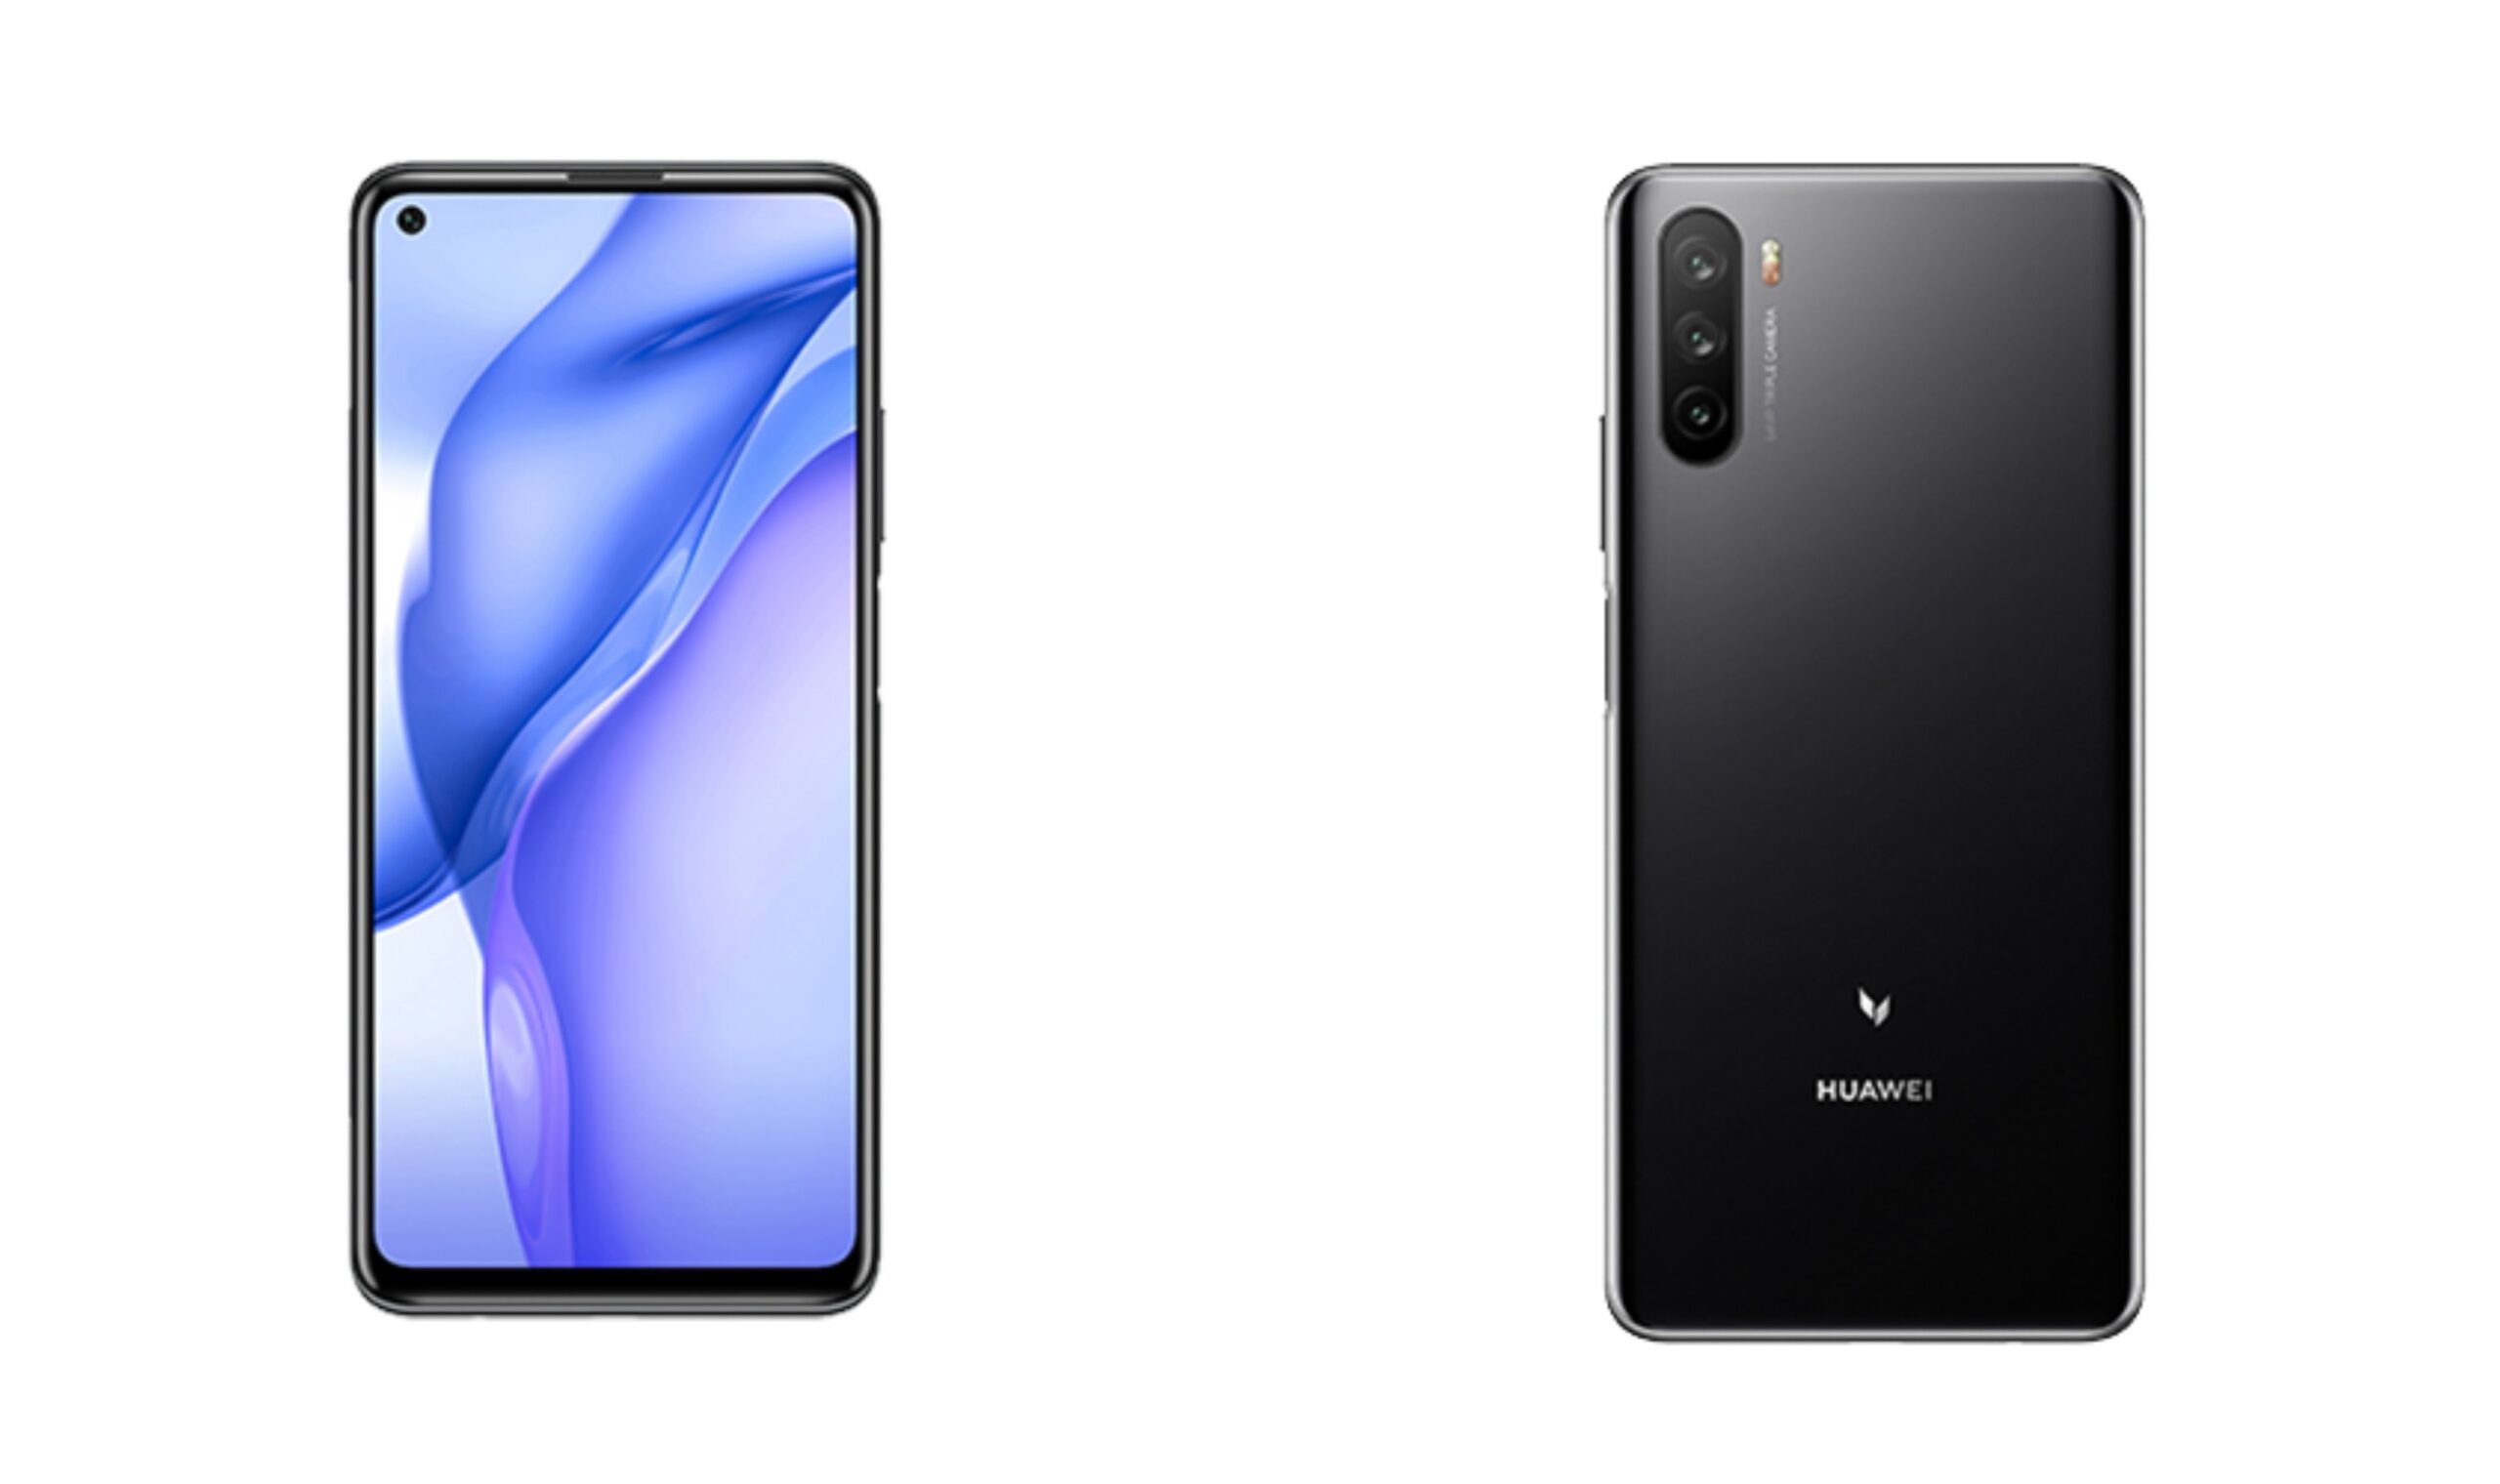 Huawei Maimang 9 listing on China Telecom reveals entire specs and price